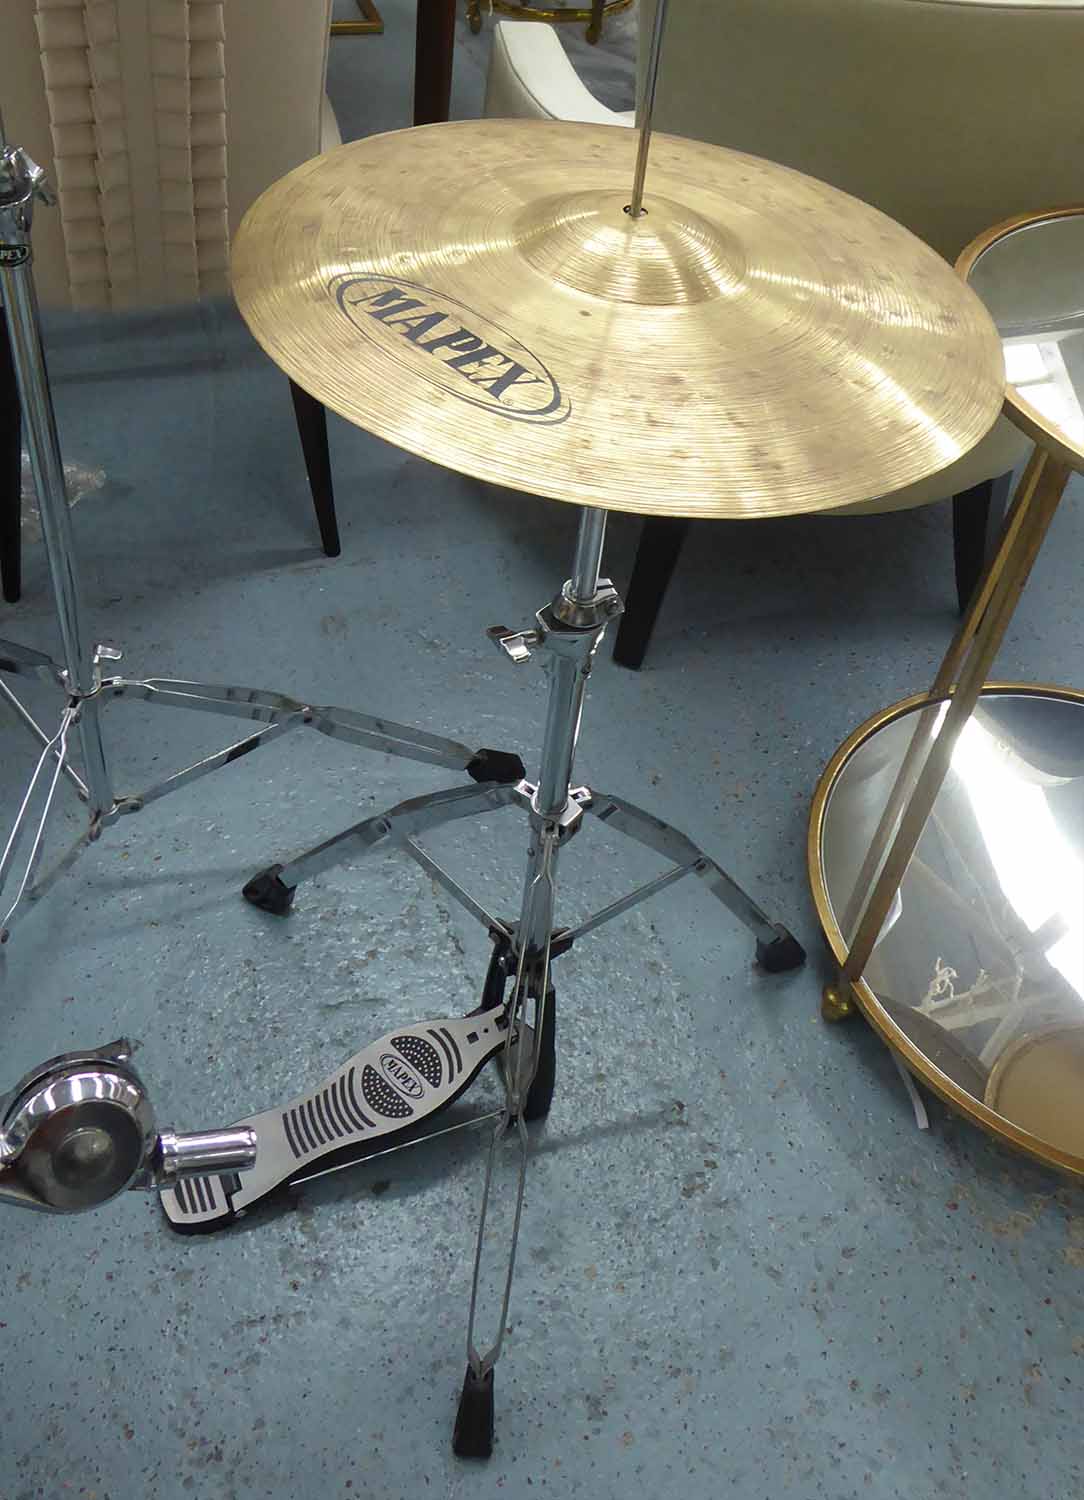 MAPEX DRUM KIT AND STOOL, with various drums and cymbols, 114cm H. - Image 3 of 3